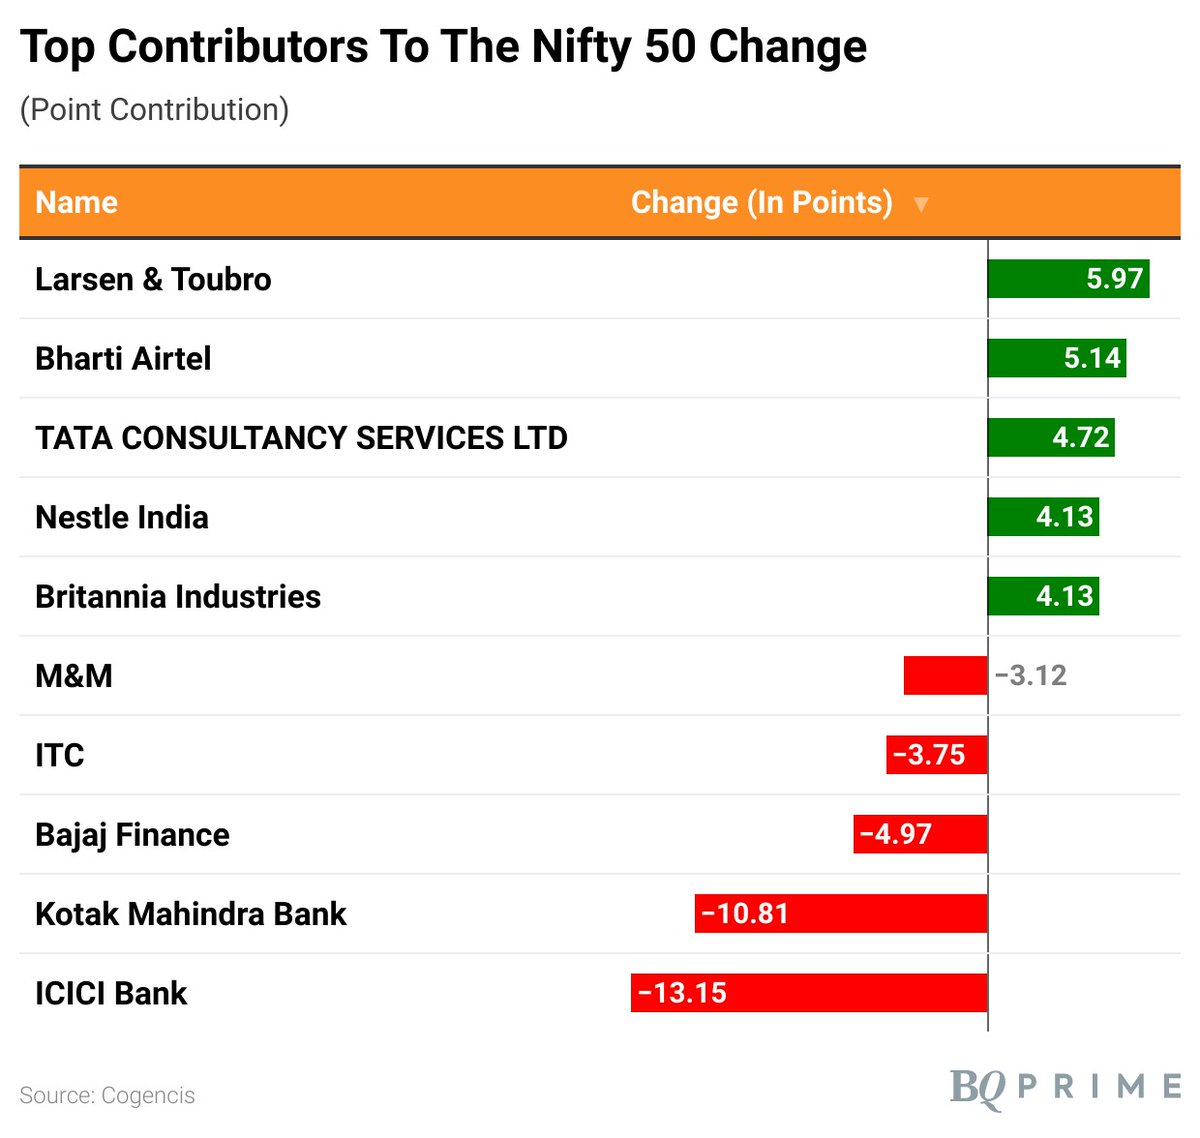 These are the top contributors to the #Nifty50 change. #BQMarkets 

Read all #stockmarket updates: bit.ly/3P4E9YB

#ICICIBank #KotakMahindraBank #BajajFinance #BhartiAirtel